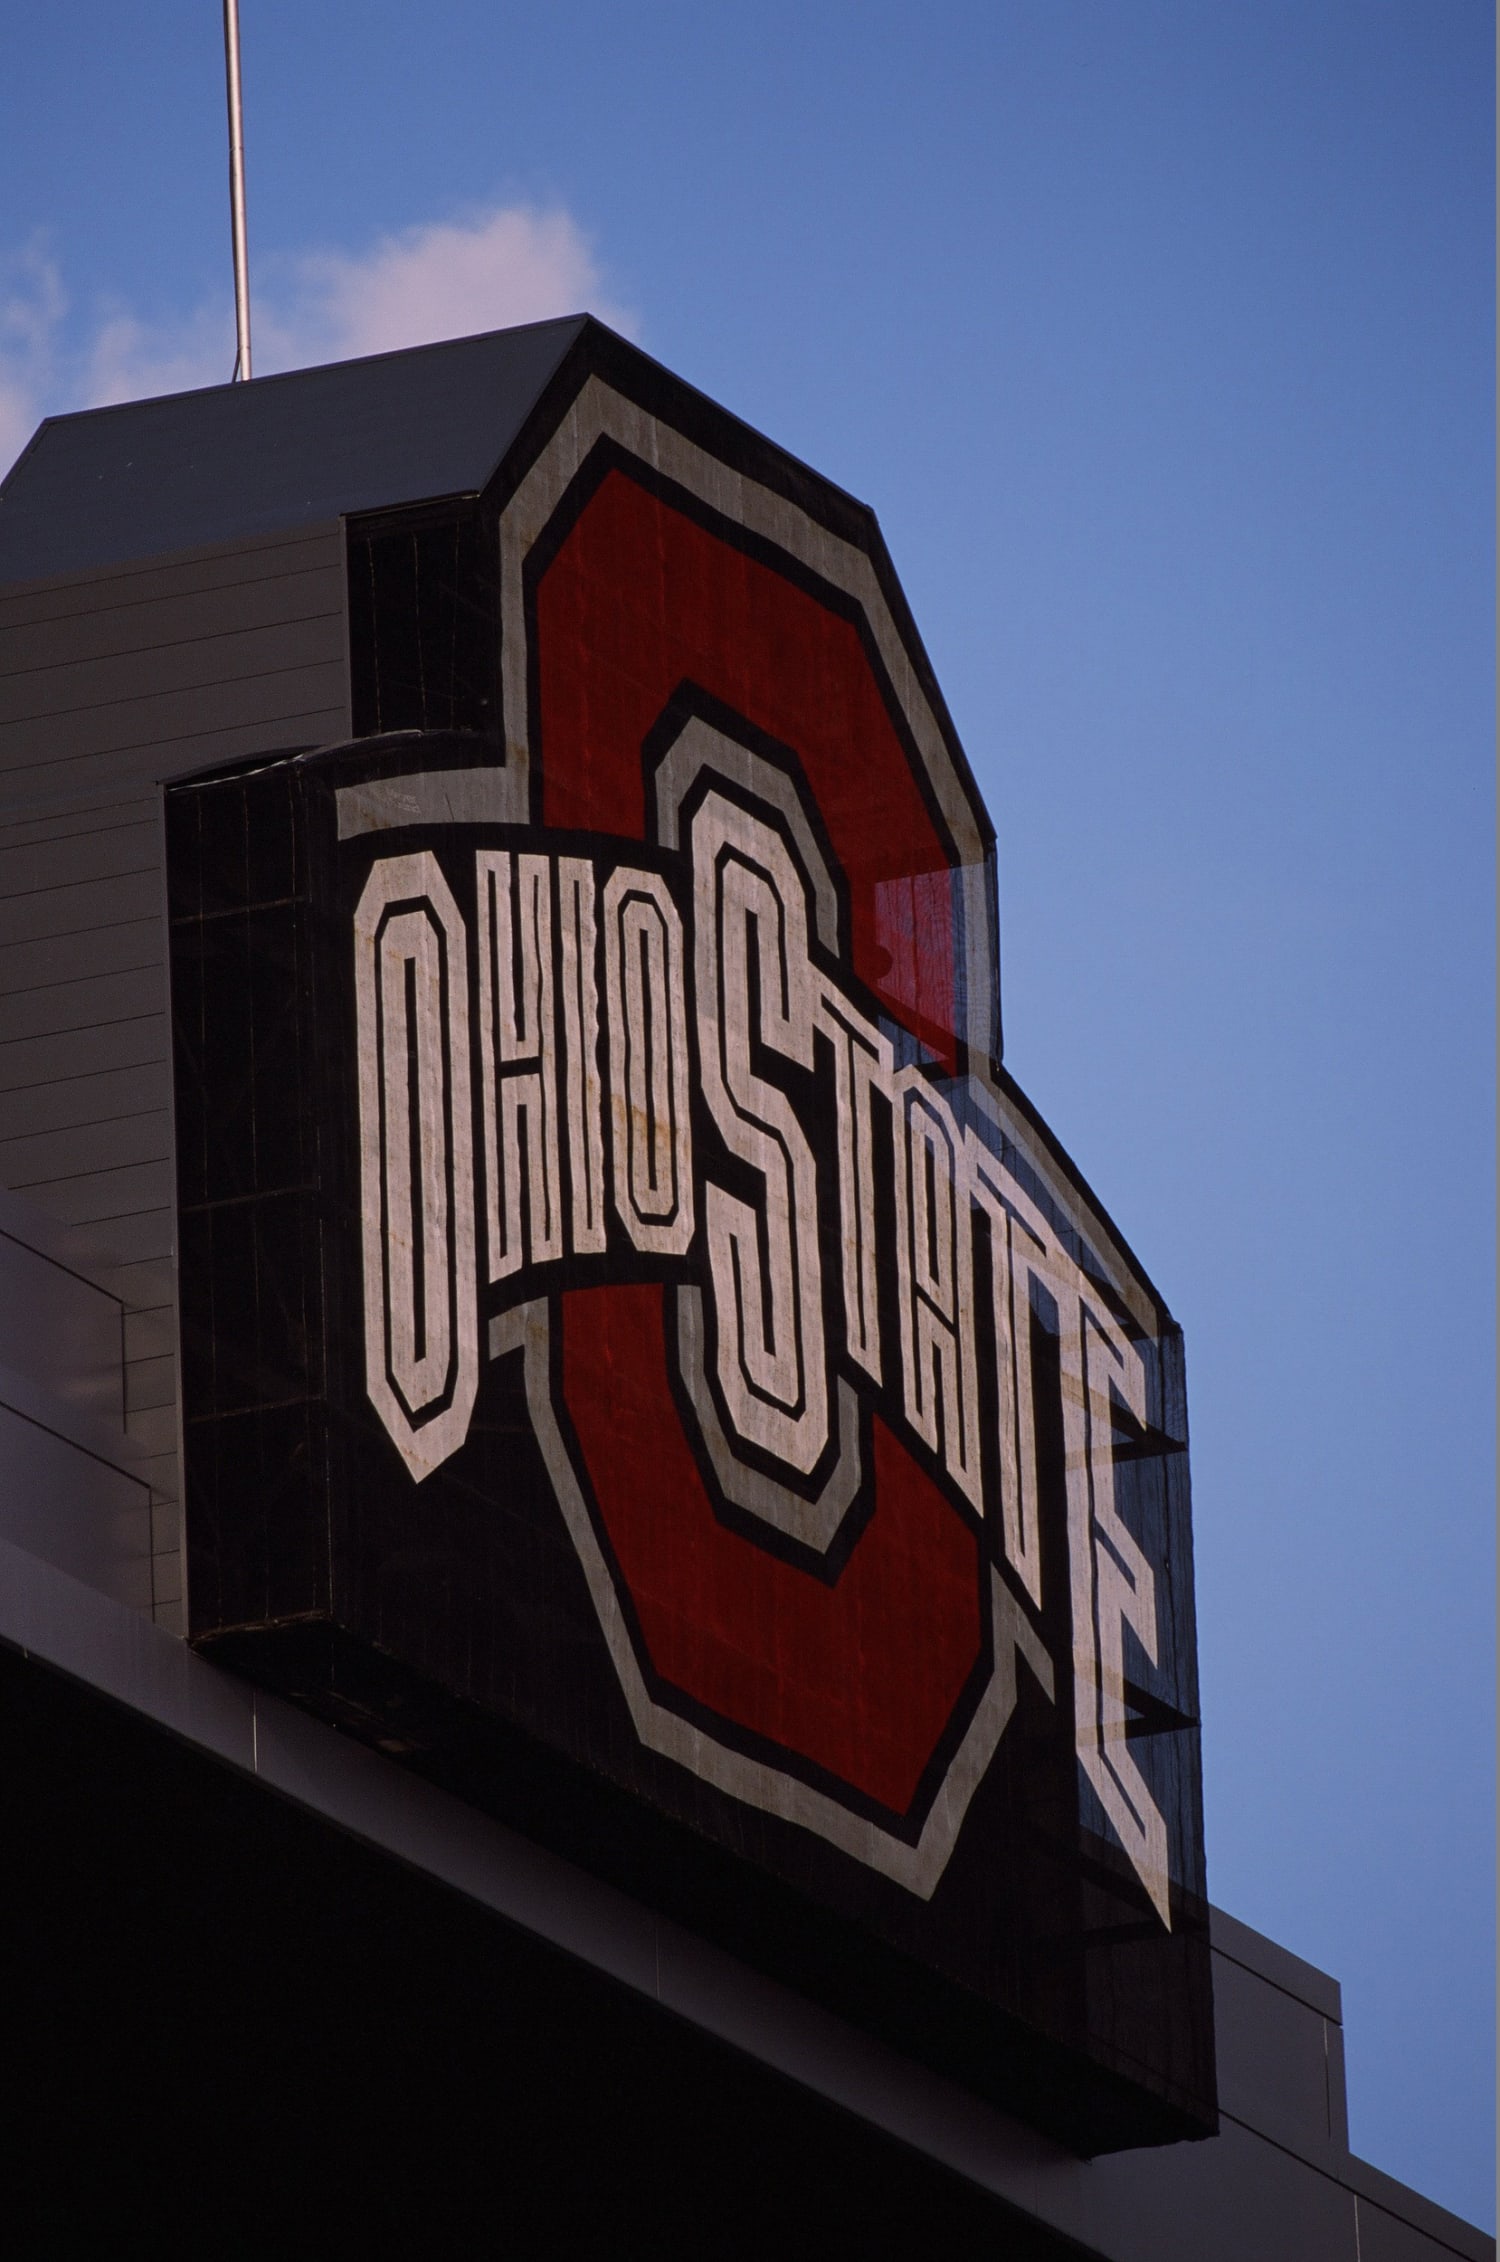 Ohio State University suspends most of its fraternities